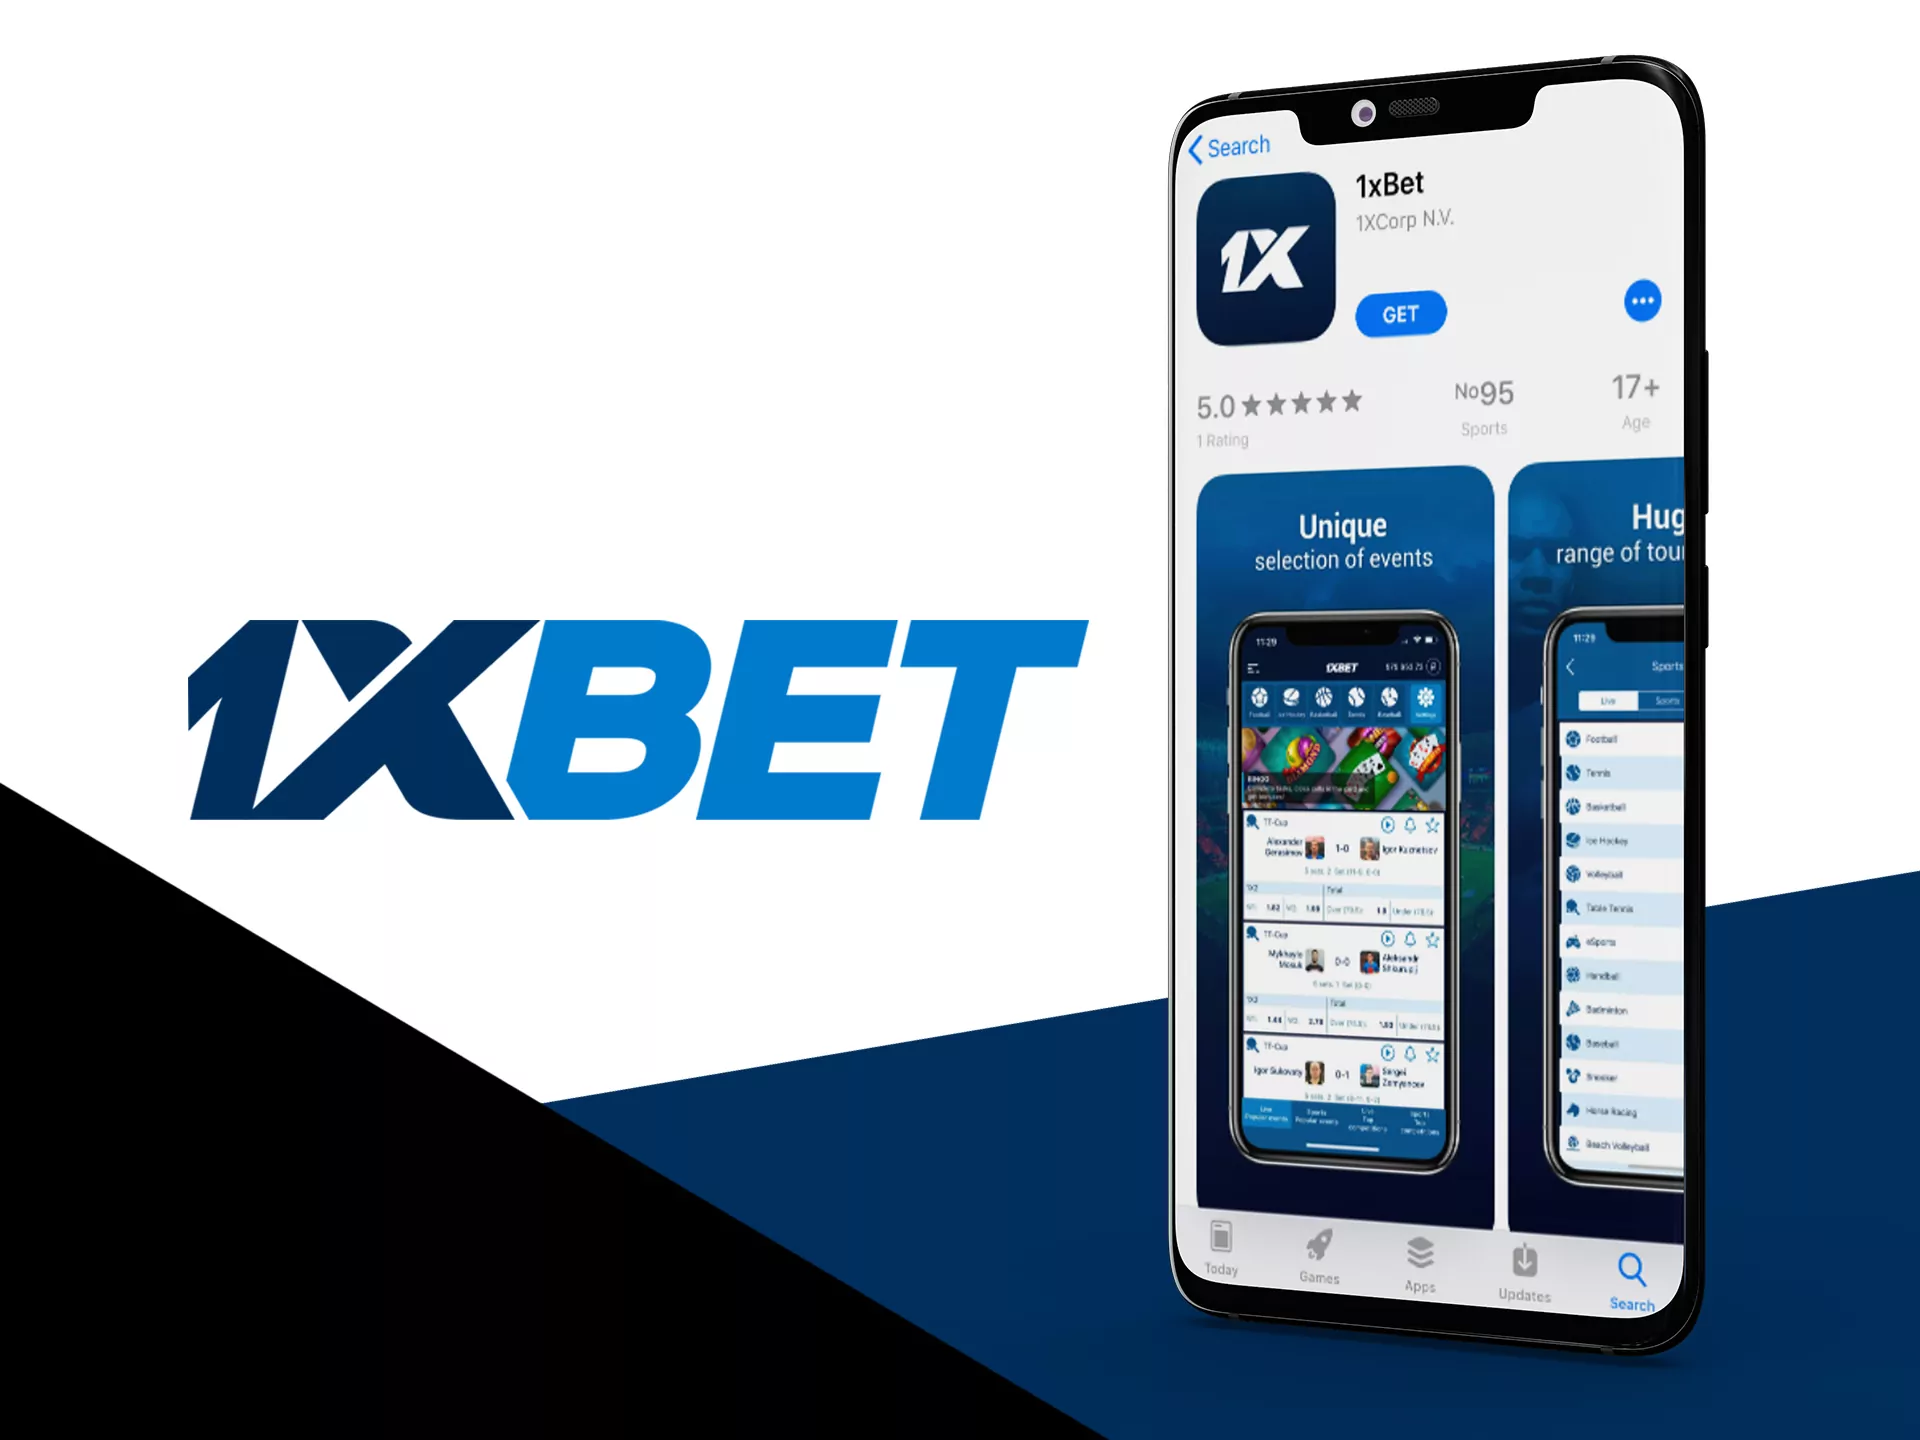 Full instruction for getting 1xbet ios app.